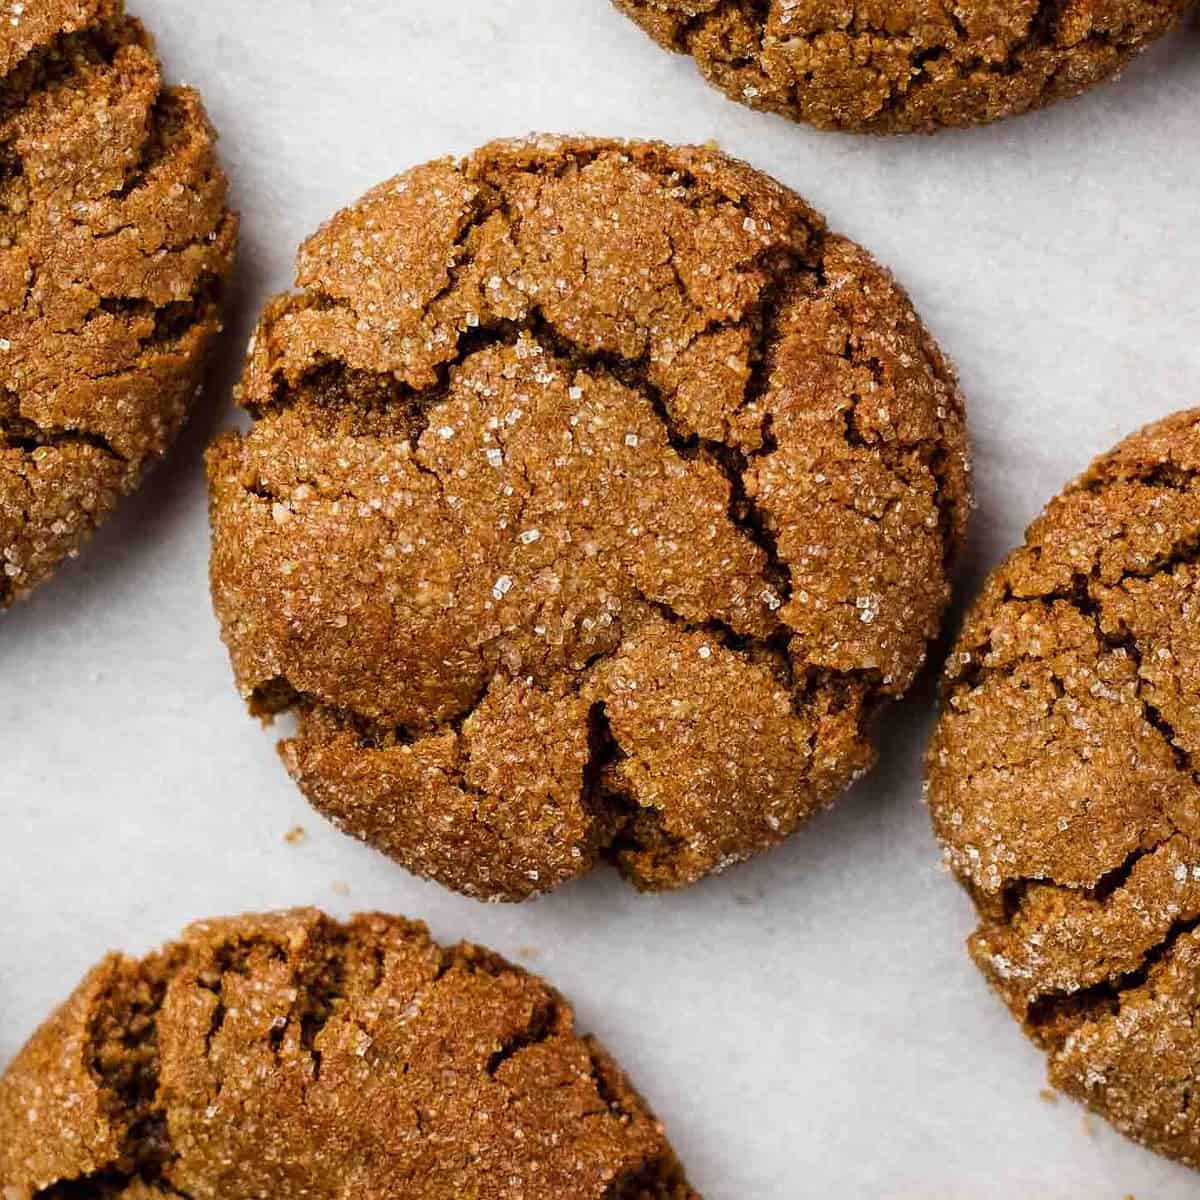  Whether you're a vegan or not, these molasses cookies are a must-try